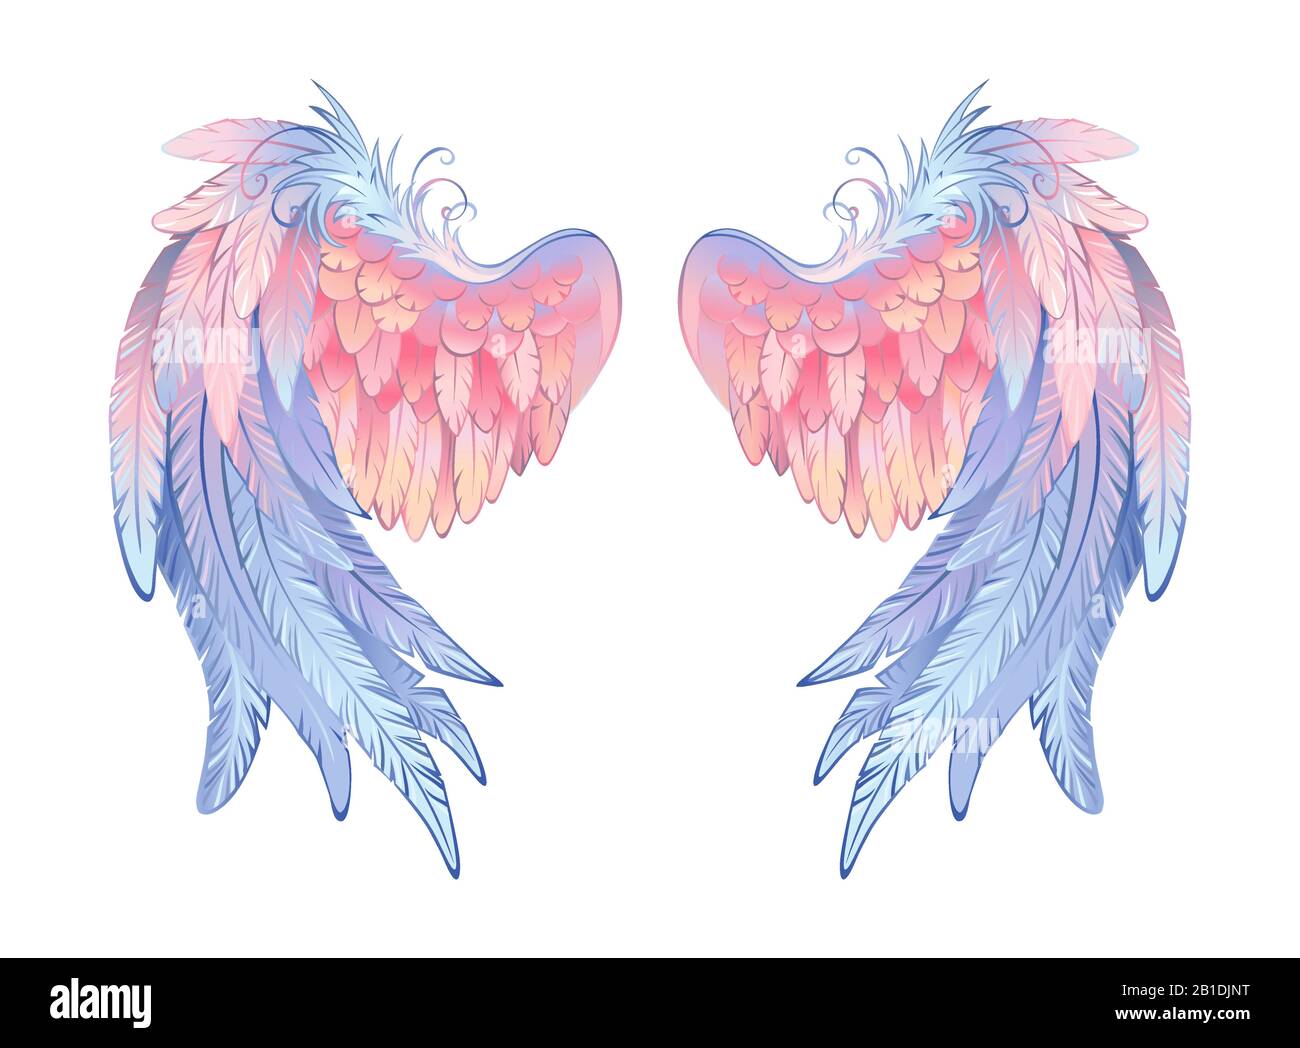 Illustration of a pack of 6 differently coloured angel wings, red, yellow,  orange, blue, purple and green, on a white background Stock Photo - Alamy